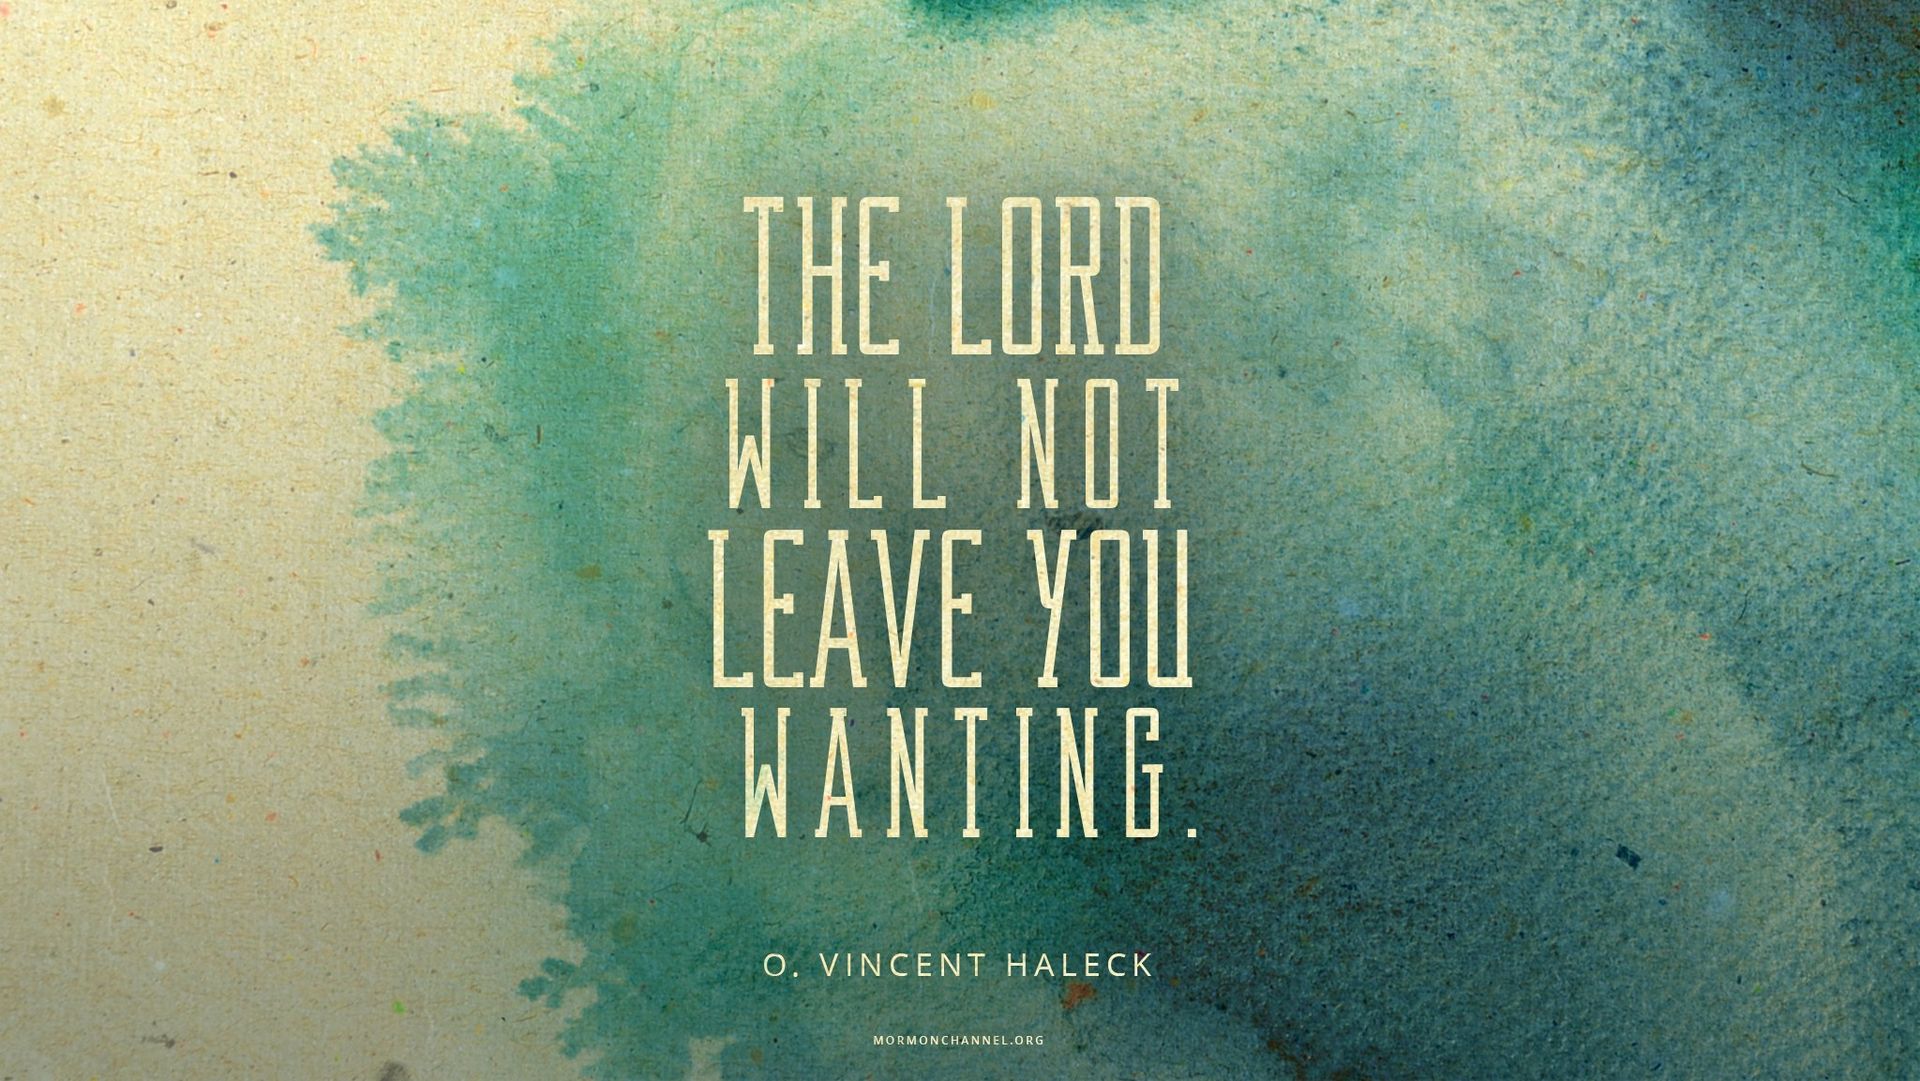 “The Lord will not leave you wanting.”—Elder O. Vincent Haleck, “The Heart of the Widow” © undefined ipCode 1.